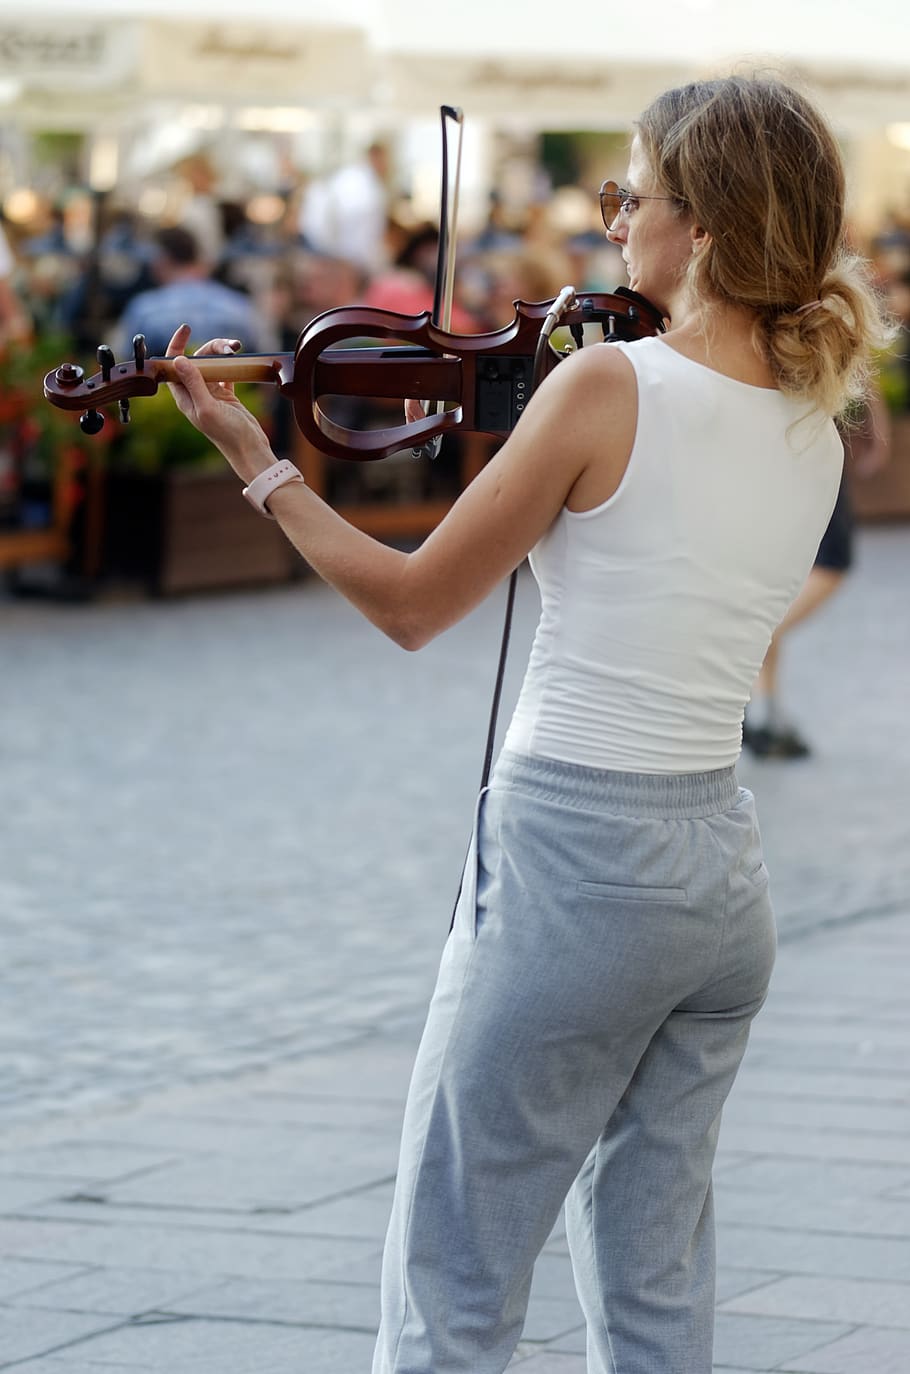 woman, the singer, music, violin, young, person, female, violinist, interpreting, street